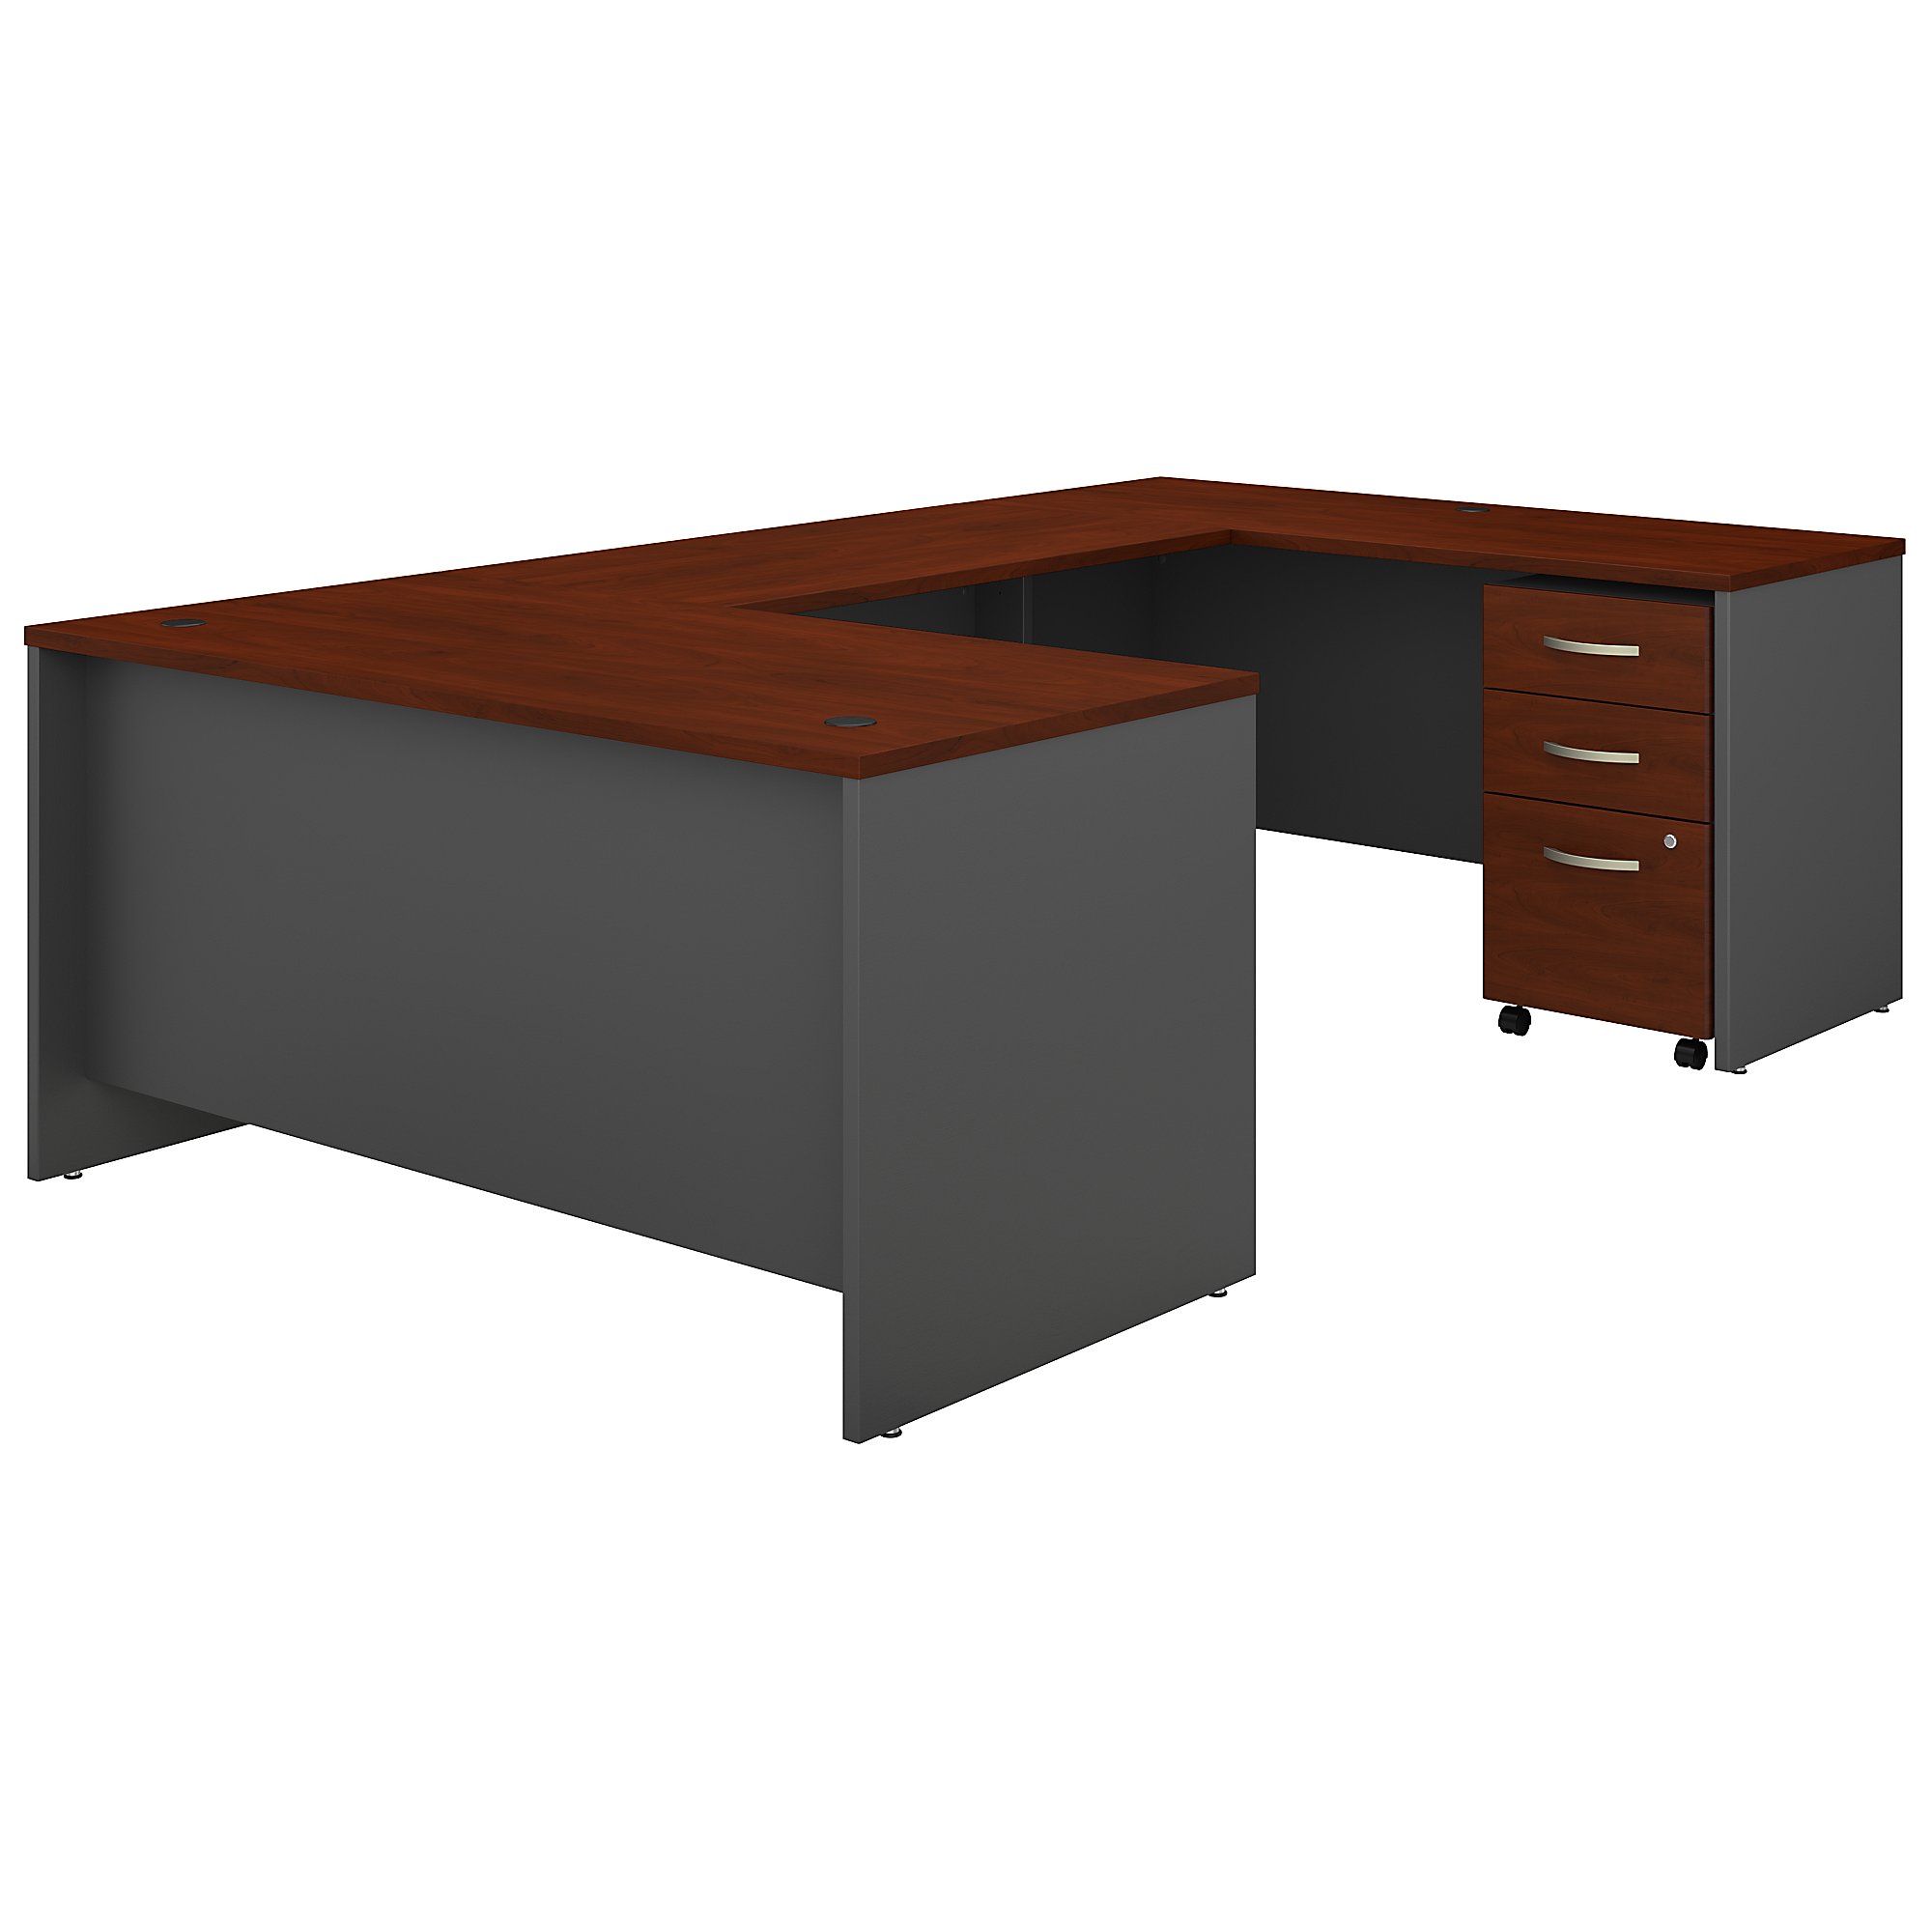 Series C 60W U Shaped Desk with Drawers in Hansen Cherry - Engineered Wood - image 4 of 10